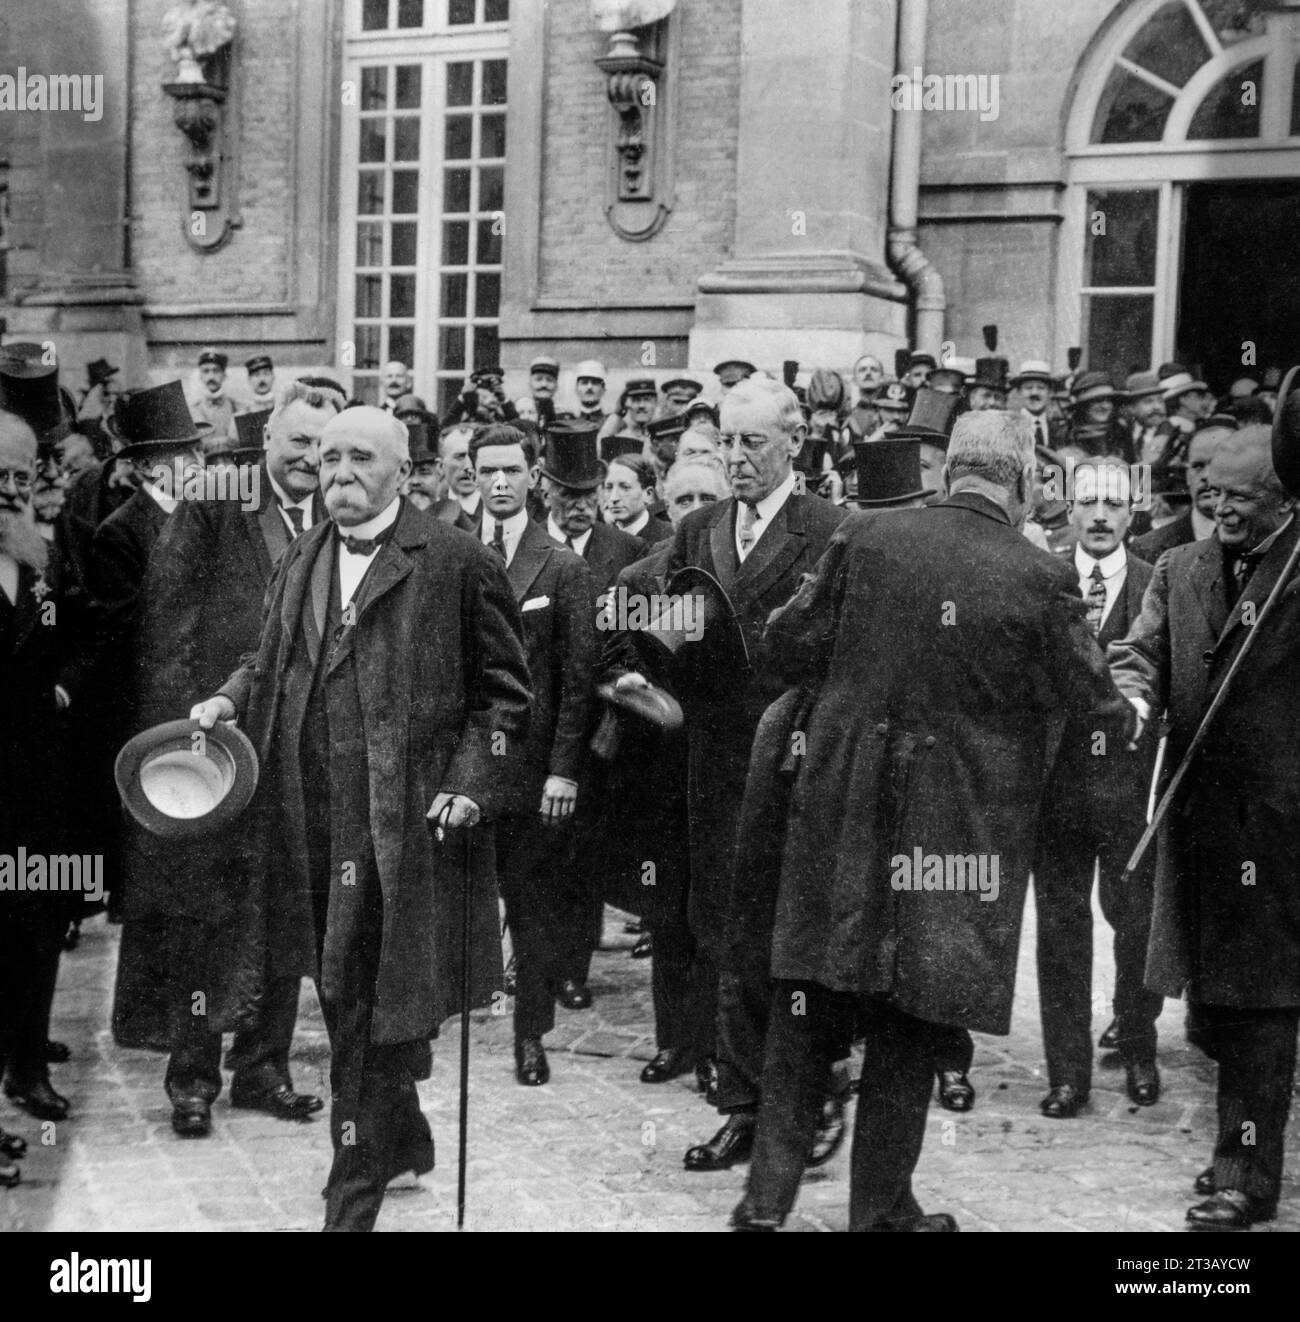 Photography , Exit from the Versailles palace of Georges Clemenceau, English Prime Minister Lloyd Georges and American President Wilson after the signing of the peace treaty in Versailles on June 28, 1919 ( The Treaty of Versailles is a peace treaty signed at Versailles on June 28, 1919 between Germany and the Allies at the end of the First World War. ) Stock Photo